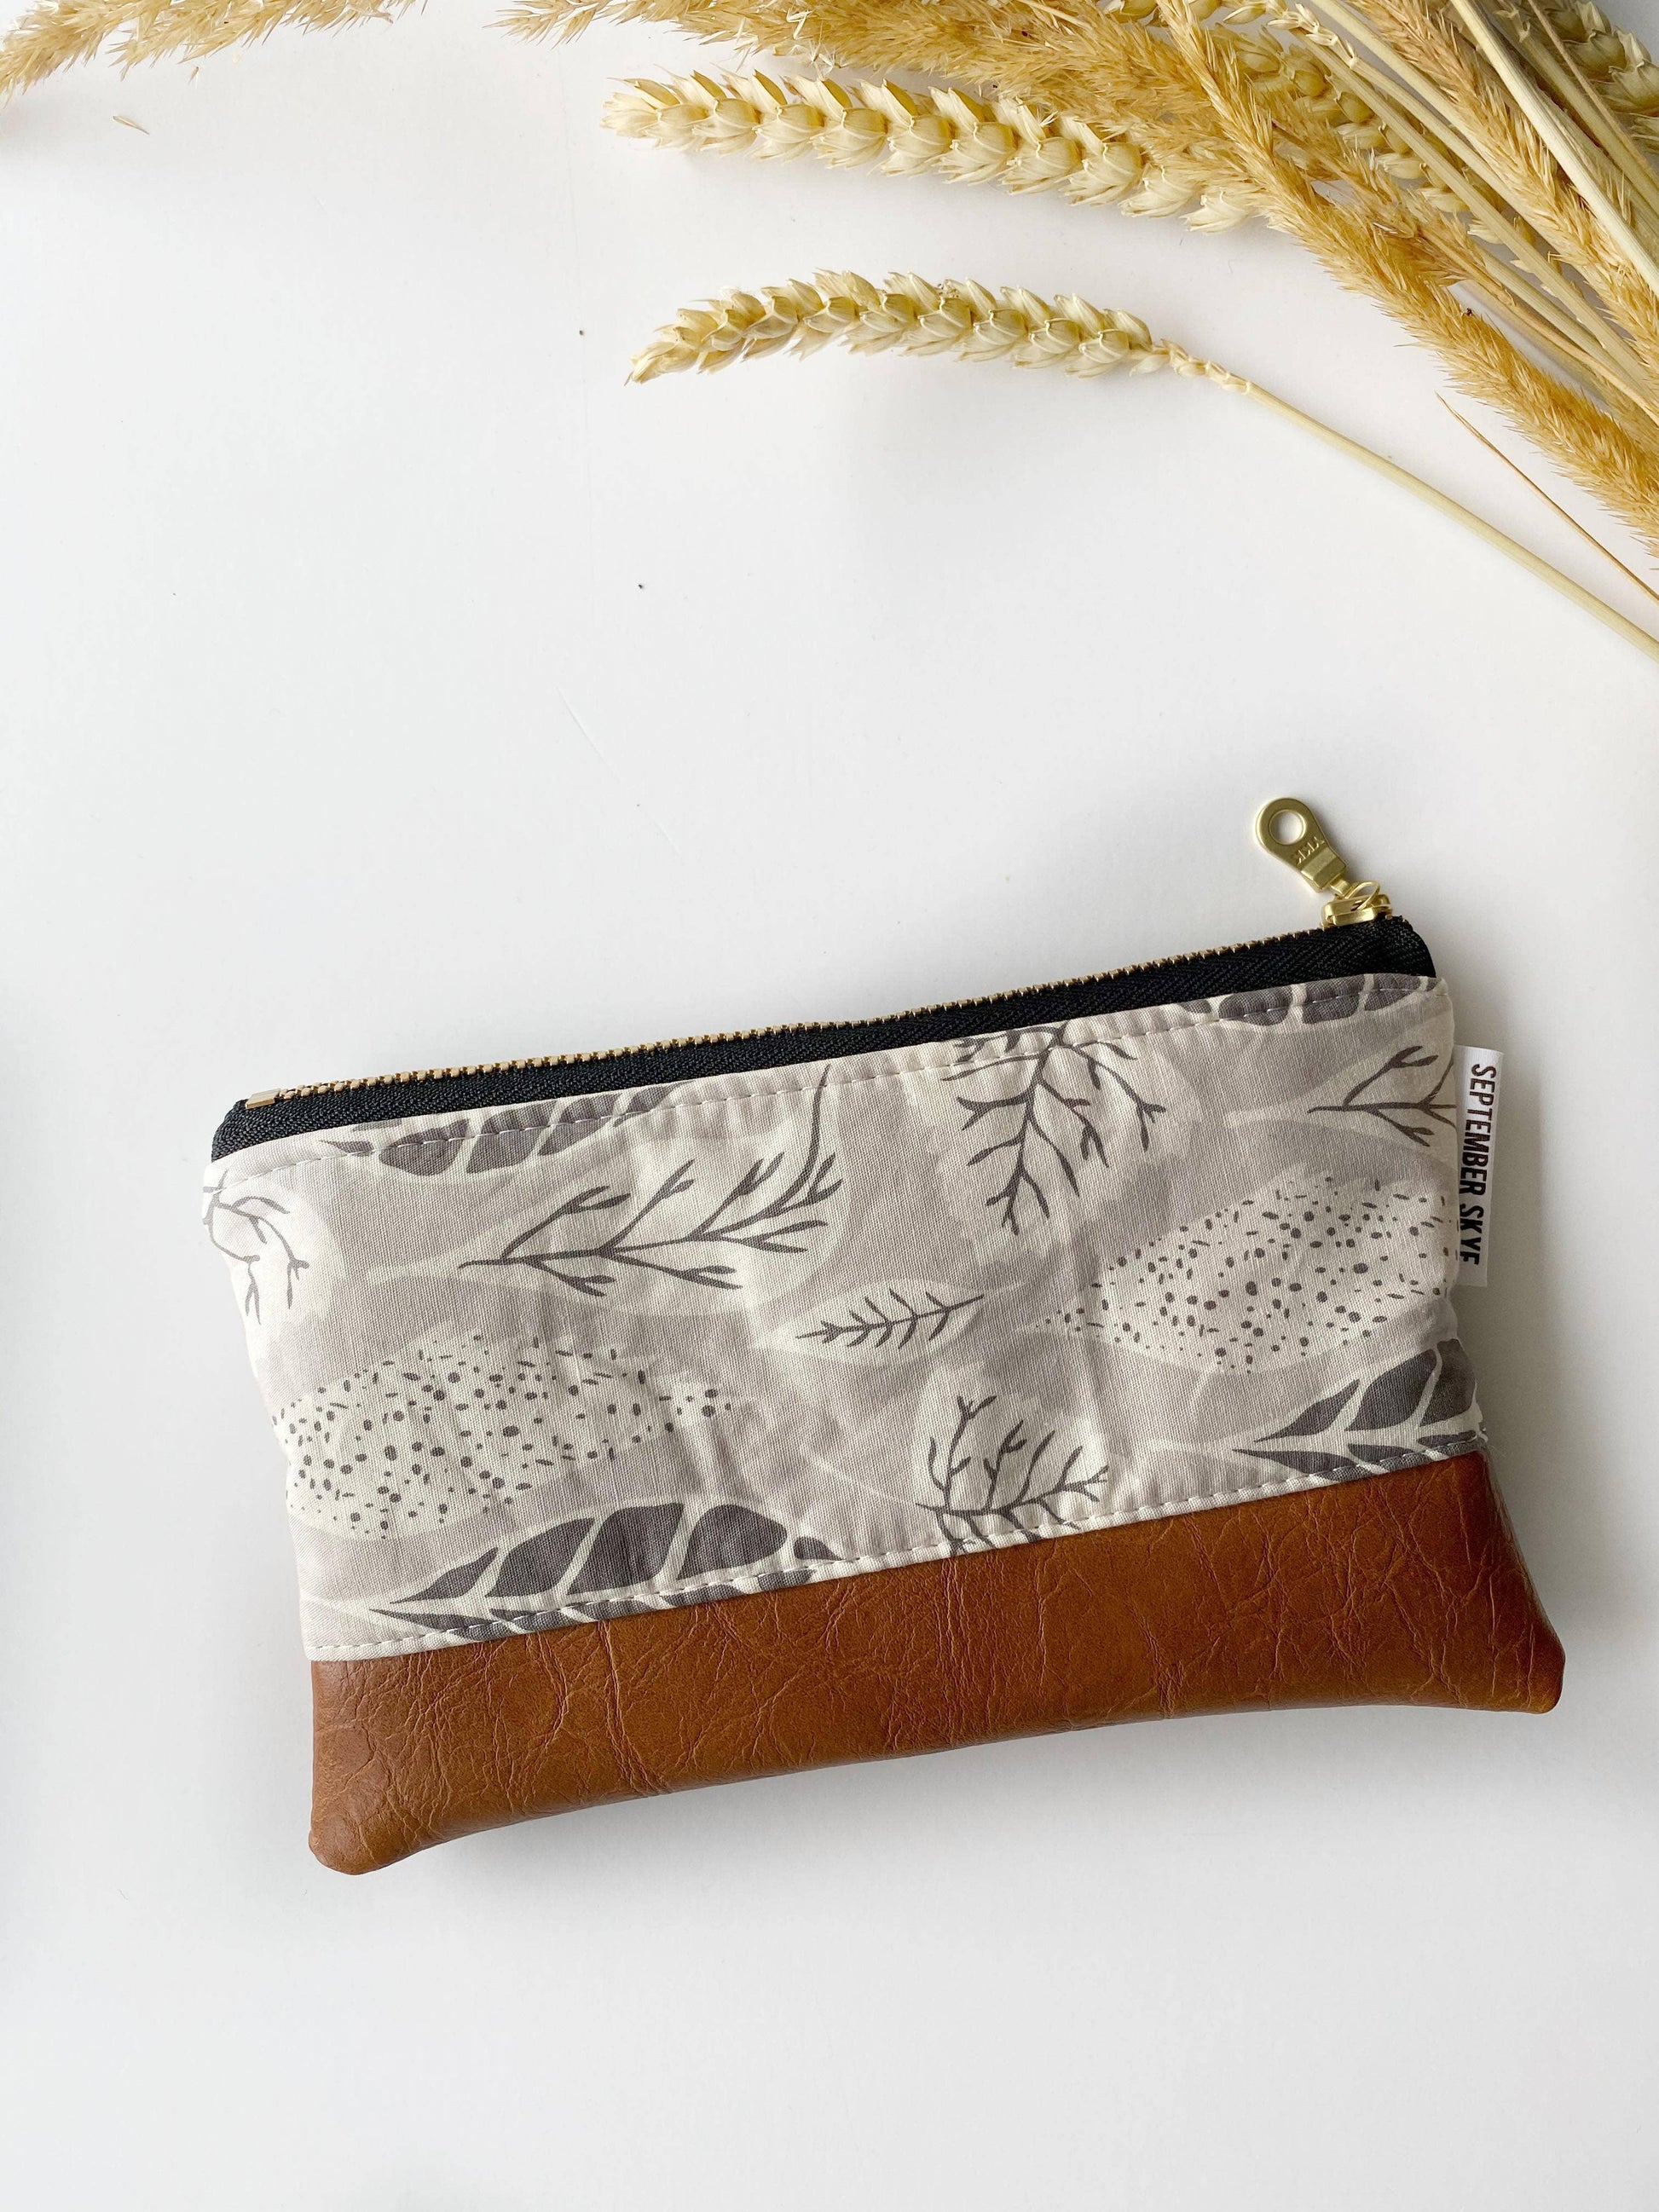 Coin purse in gray leaf Core September Skye Bags & Accessories